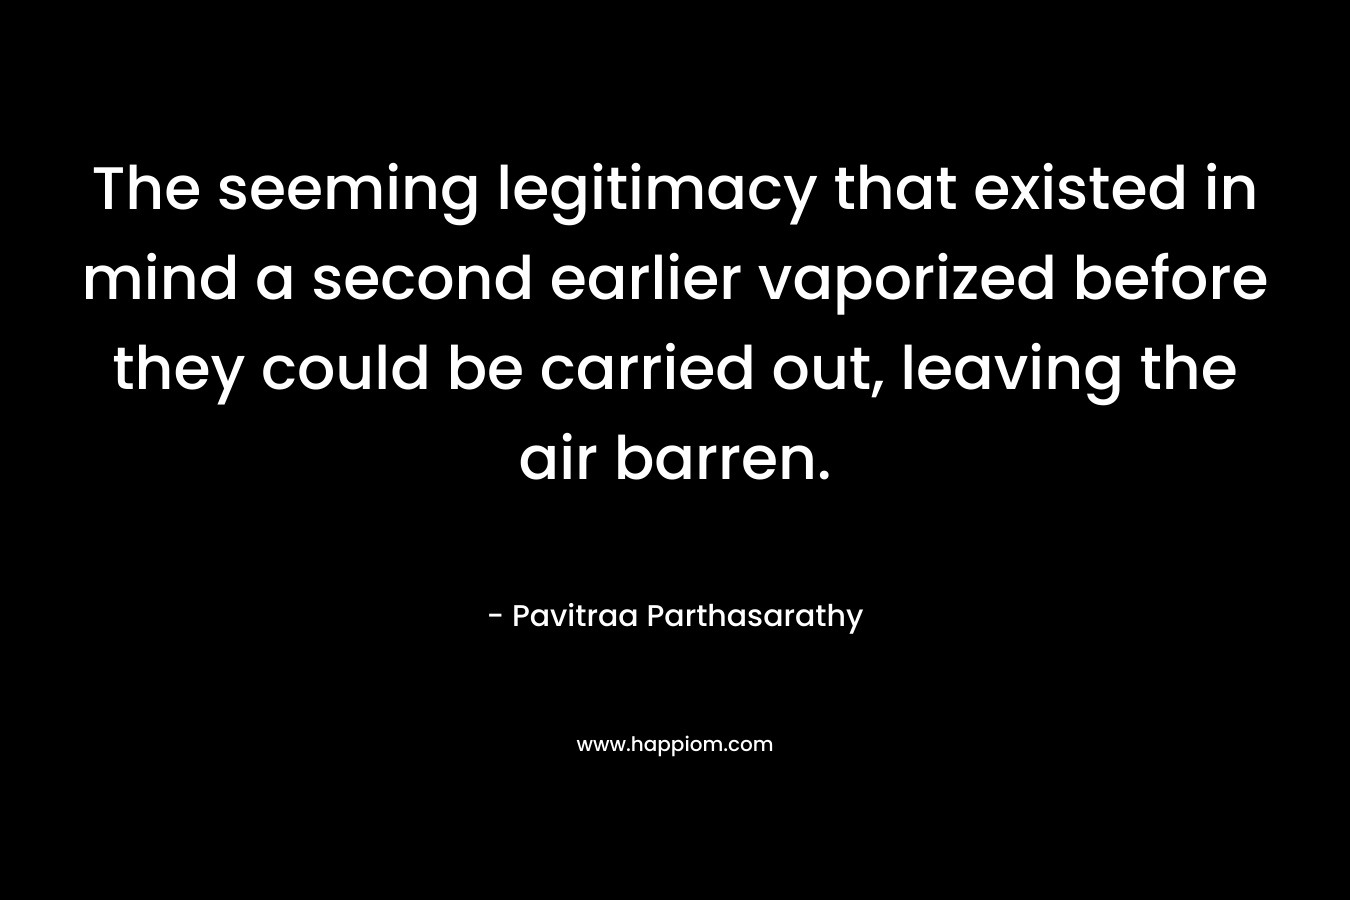 The seeming legitimacy that existed in mind a second earlier vaporized before they could be carried out, leaving the air barren.